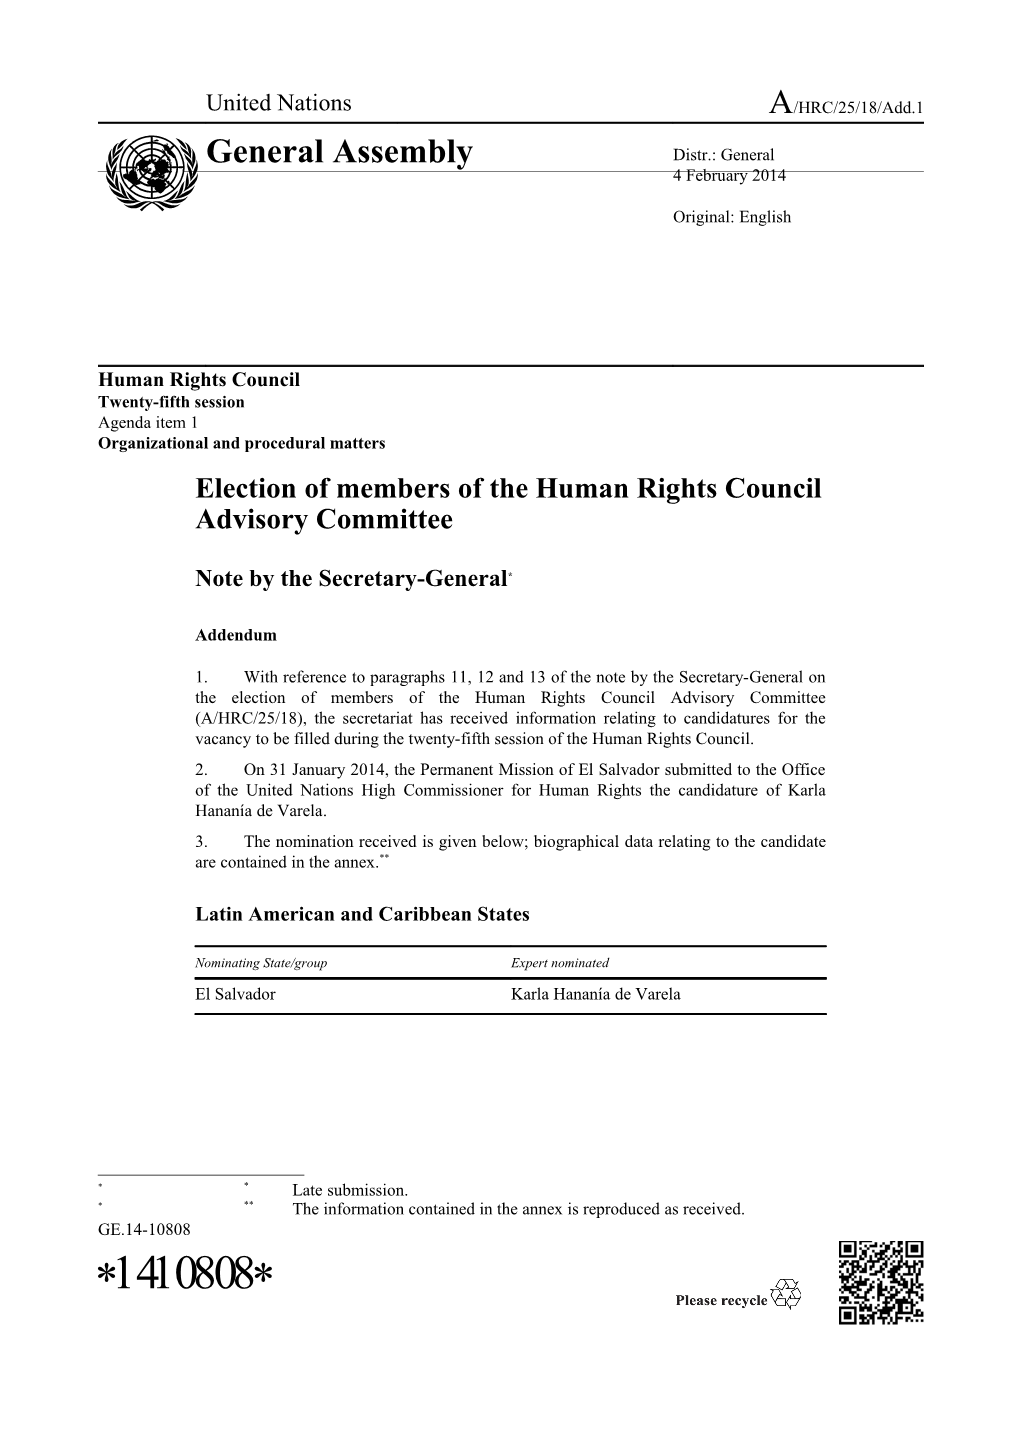 Election of Members of the Human Rights Council Advisory Committee, Note by The